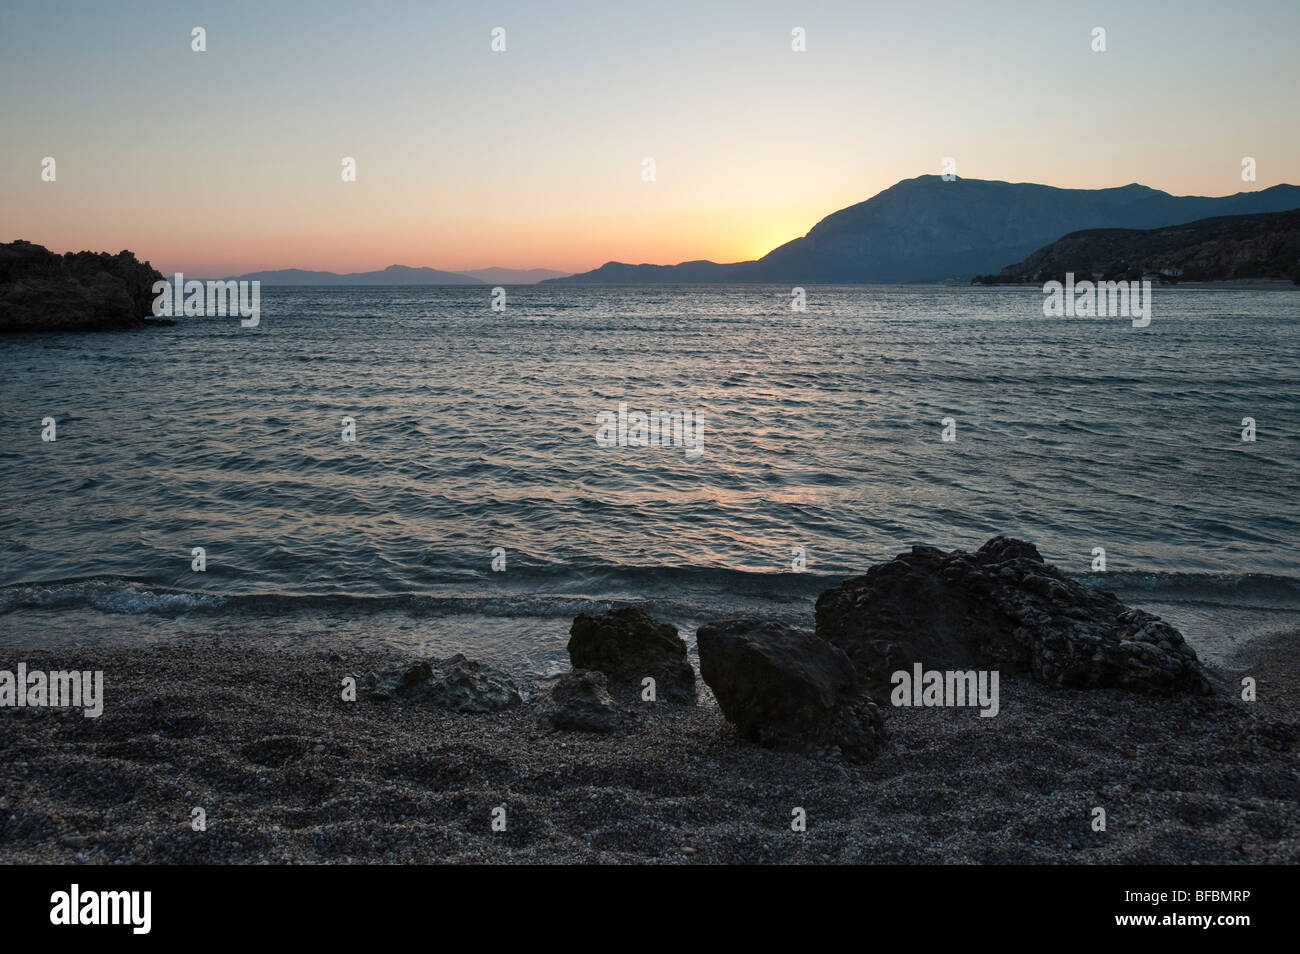 Sunset  behind mountain as seen from a beach on a greek island Stock Photo